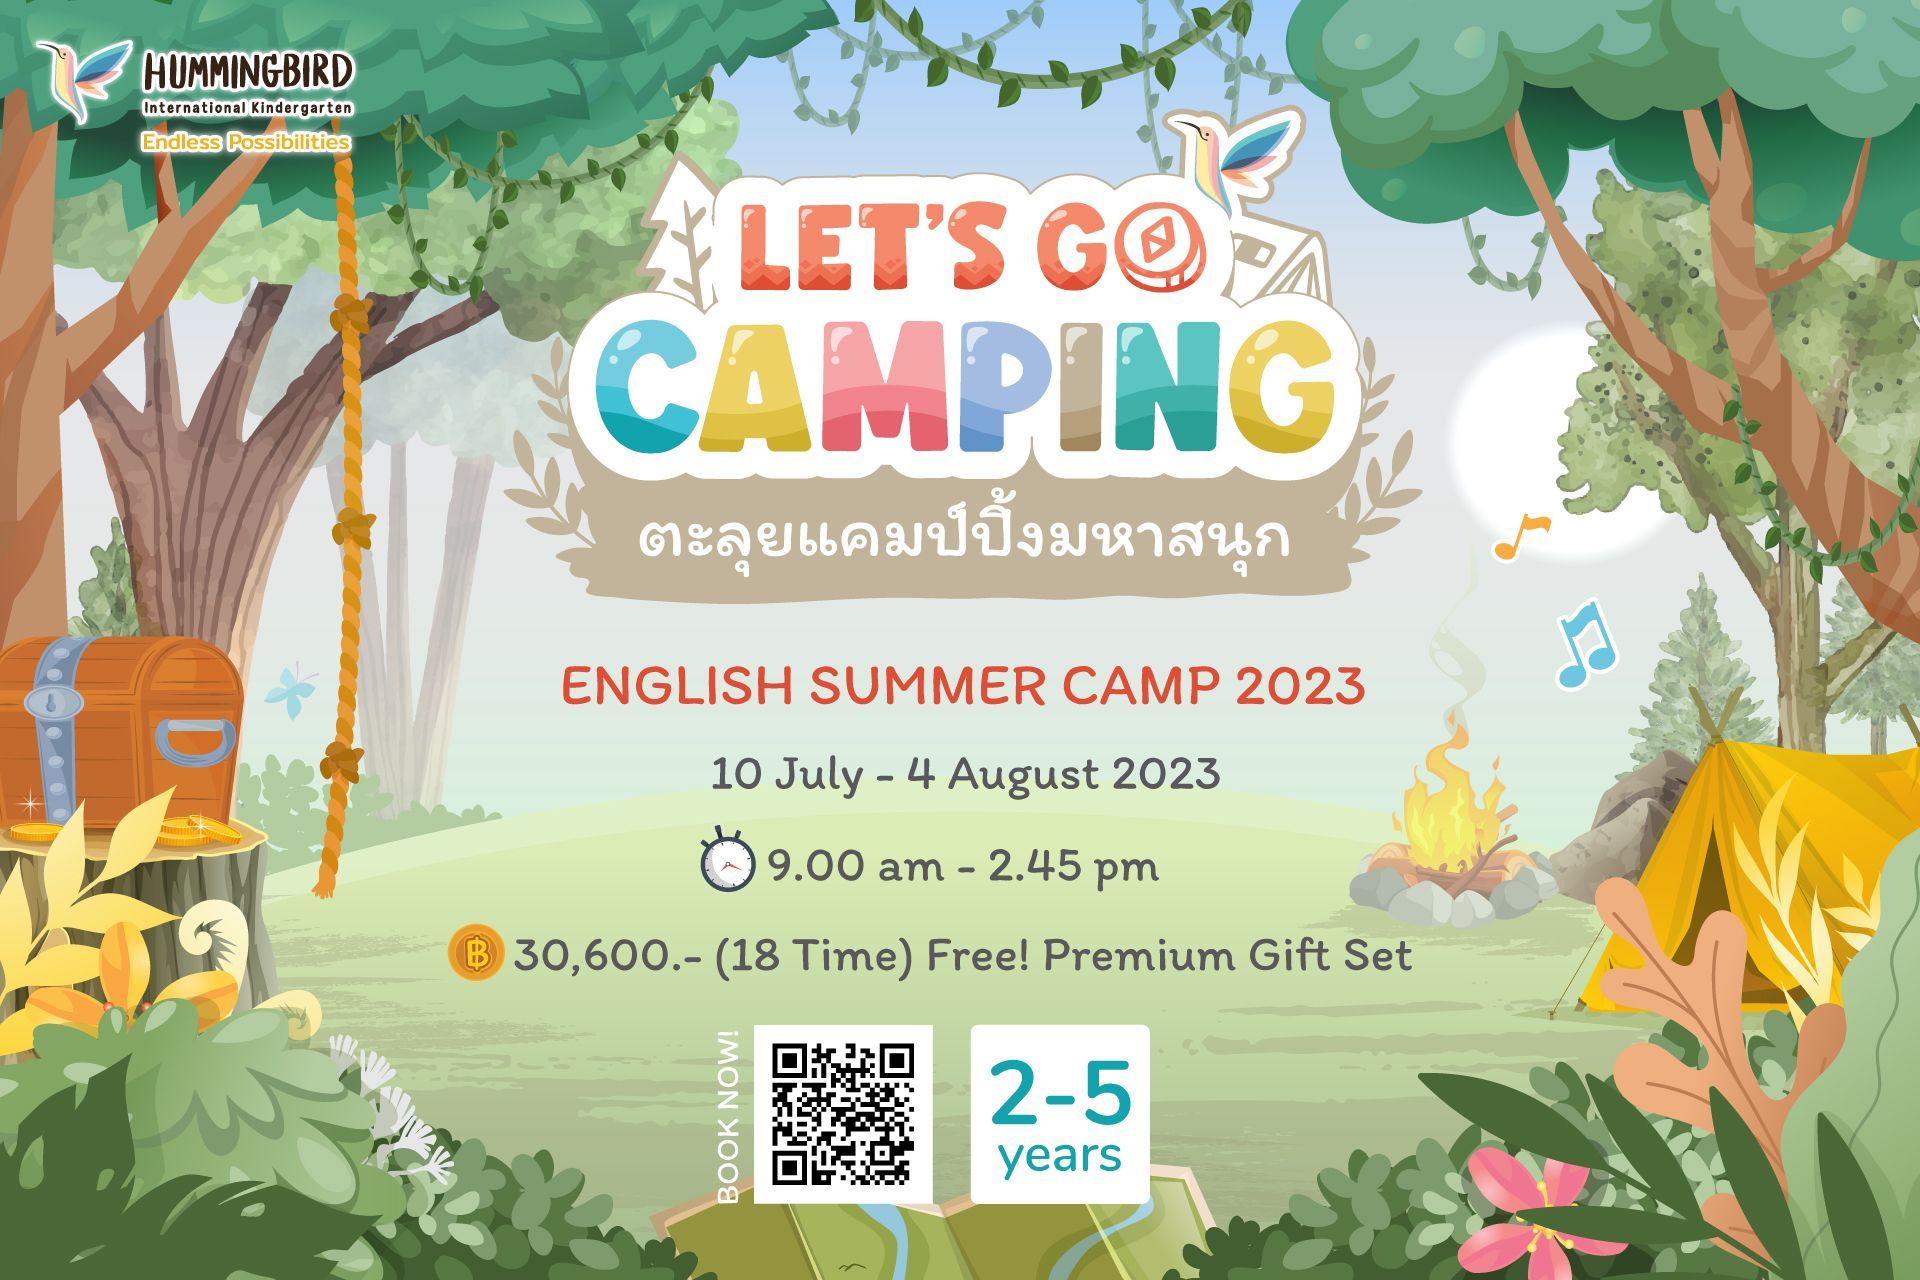 Calling on all the little travellers out there to get ready for some camping exploration! So let's t